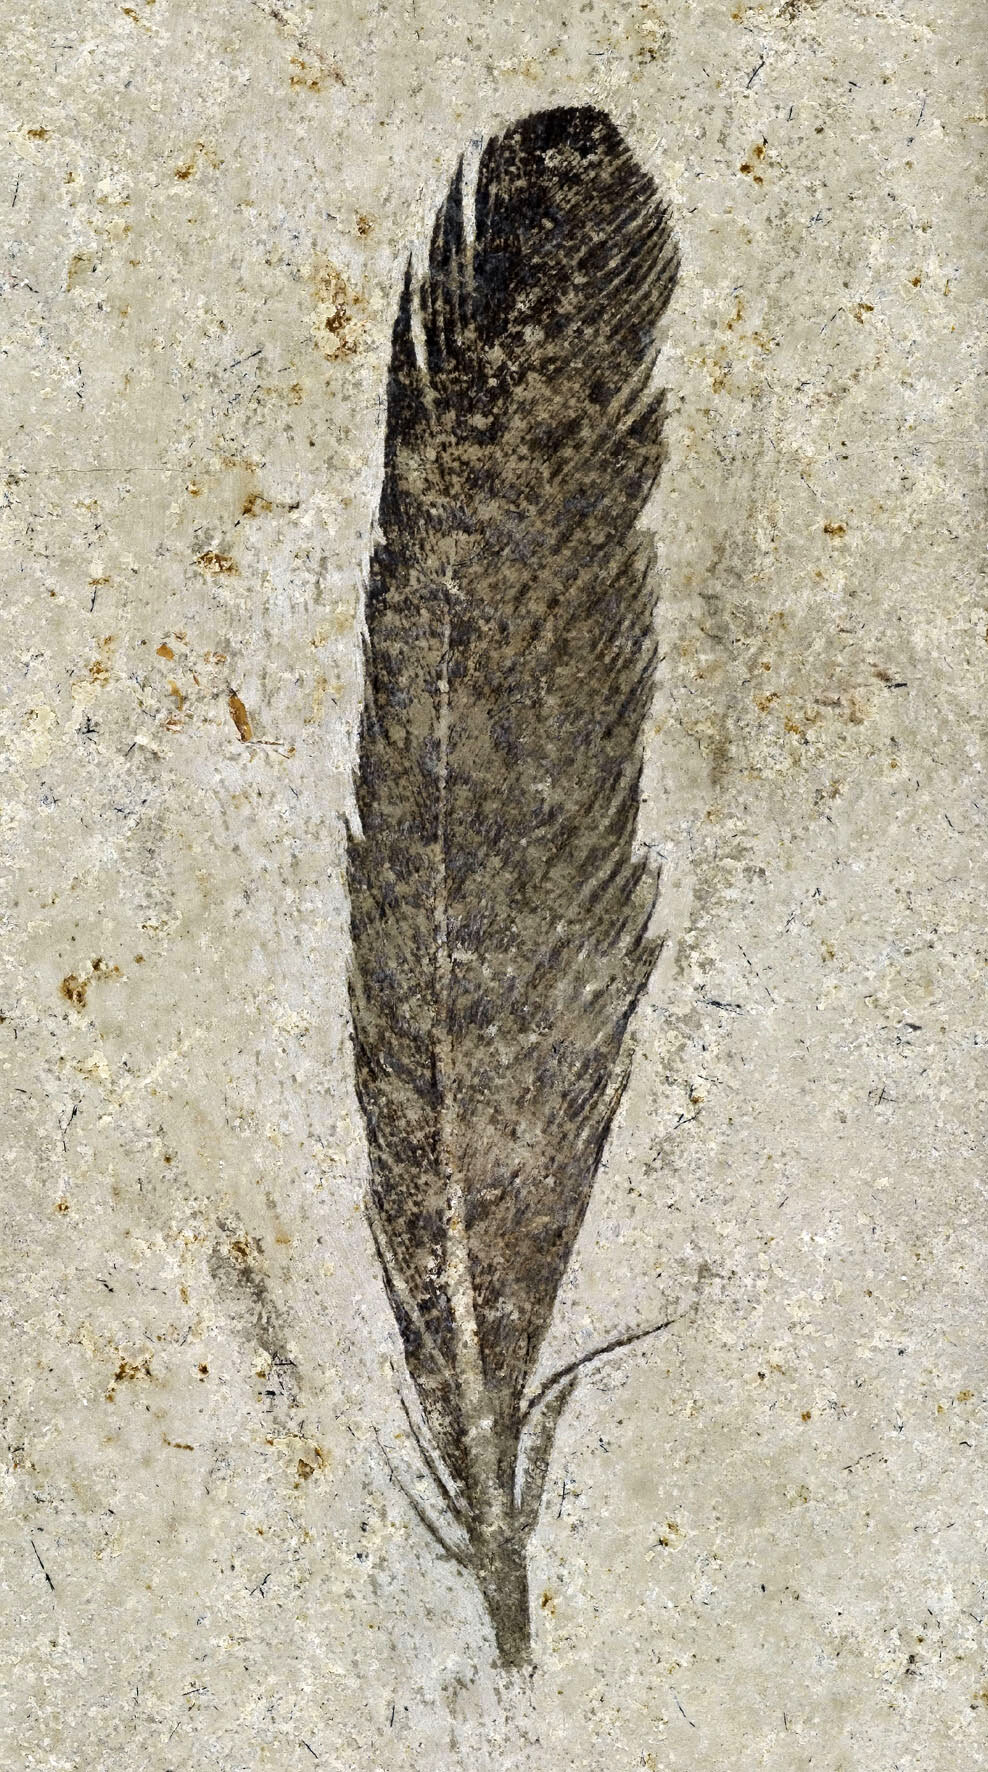 Dinosaur Feather Study Debunked: Overwhelming Evidence Supports ...